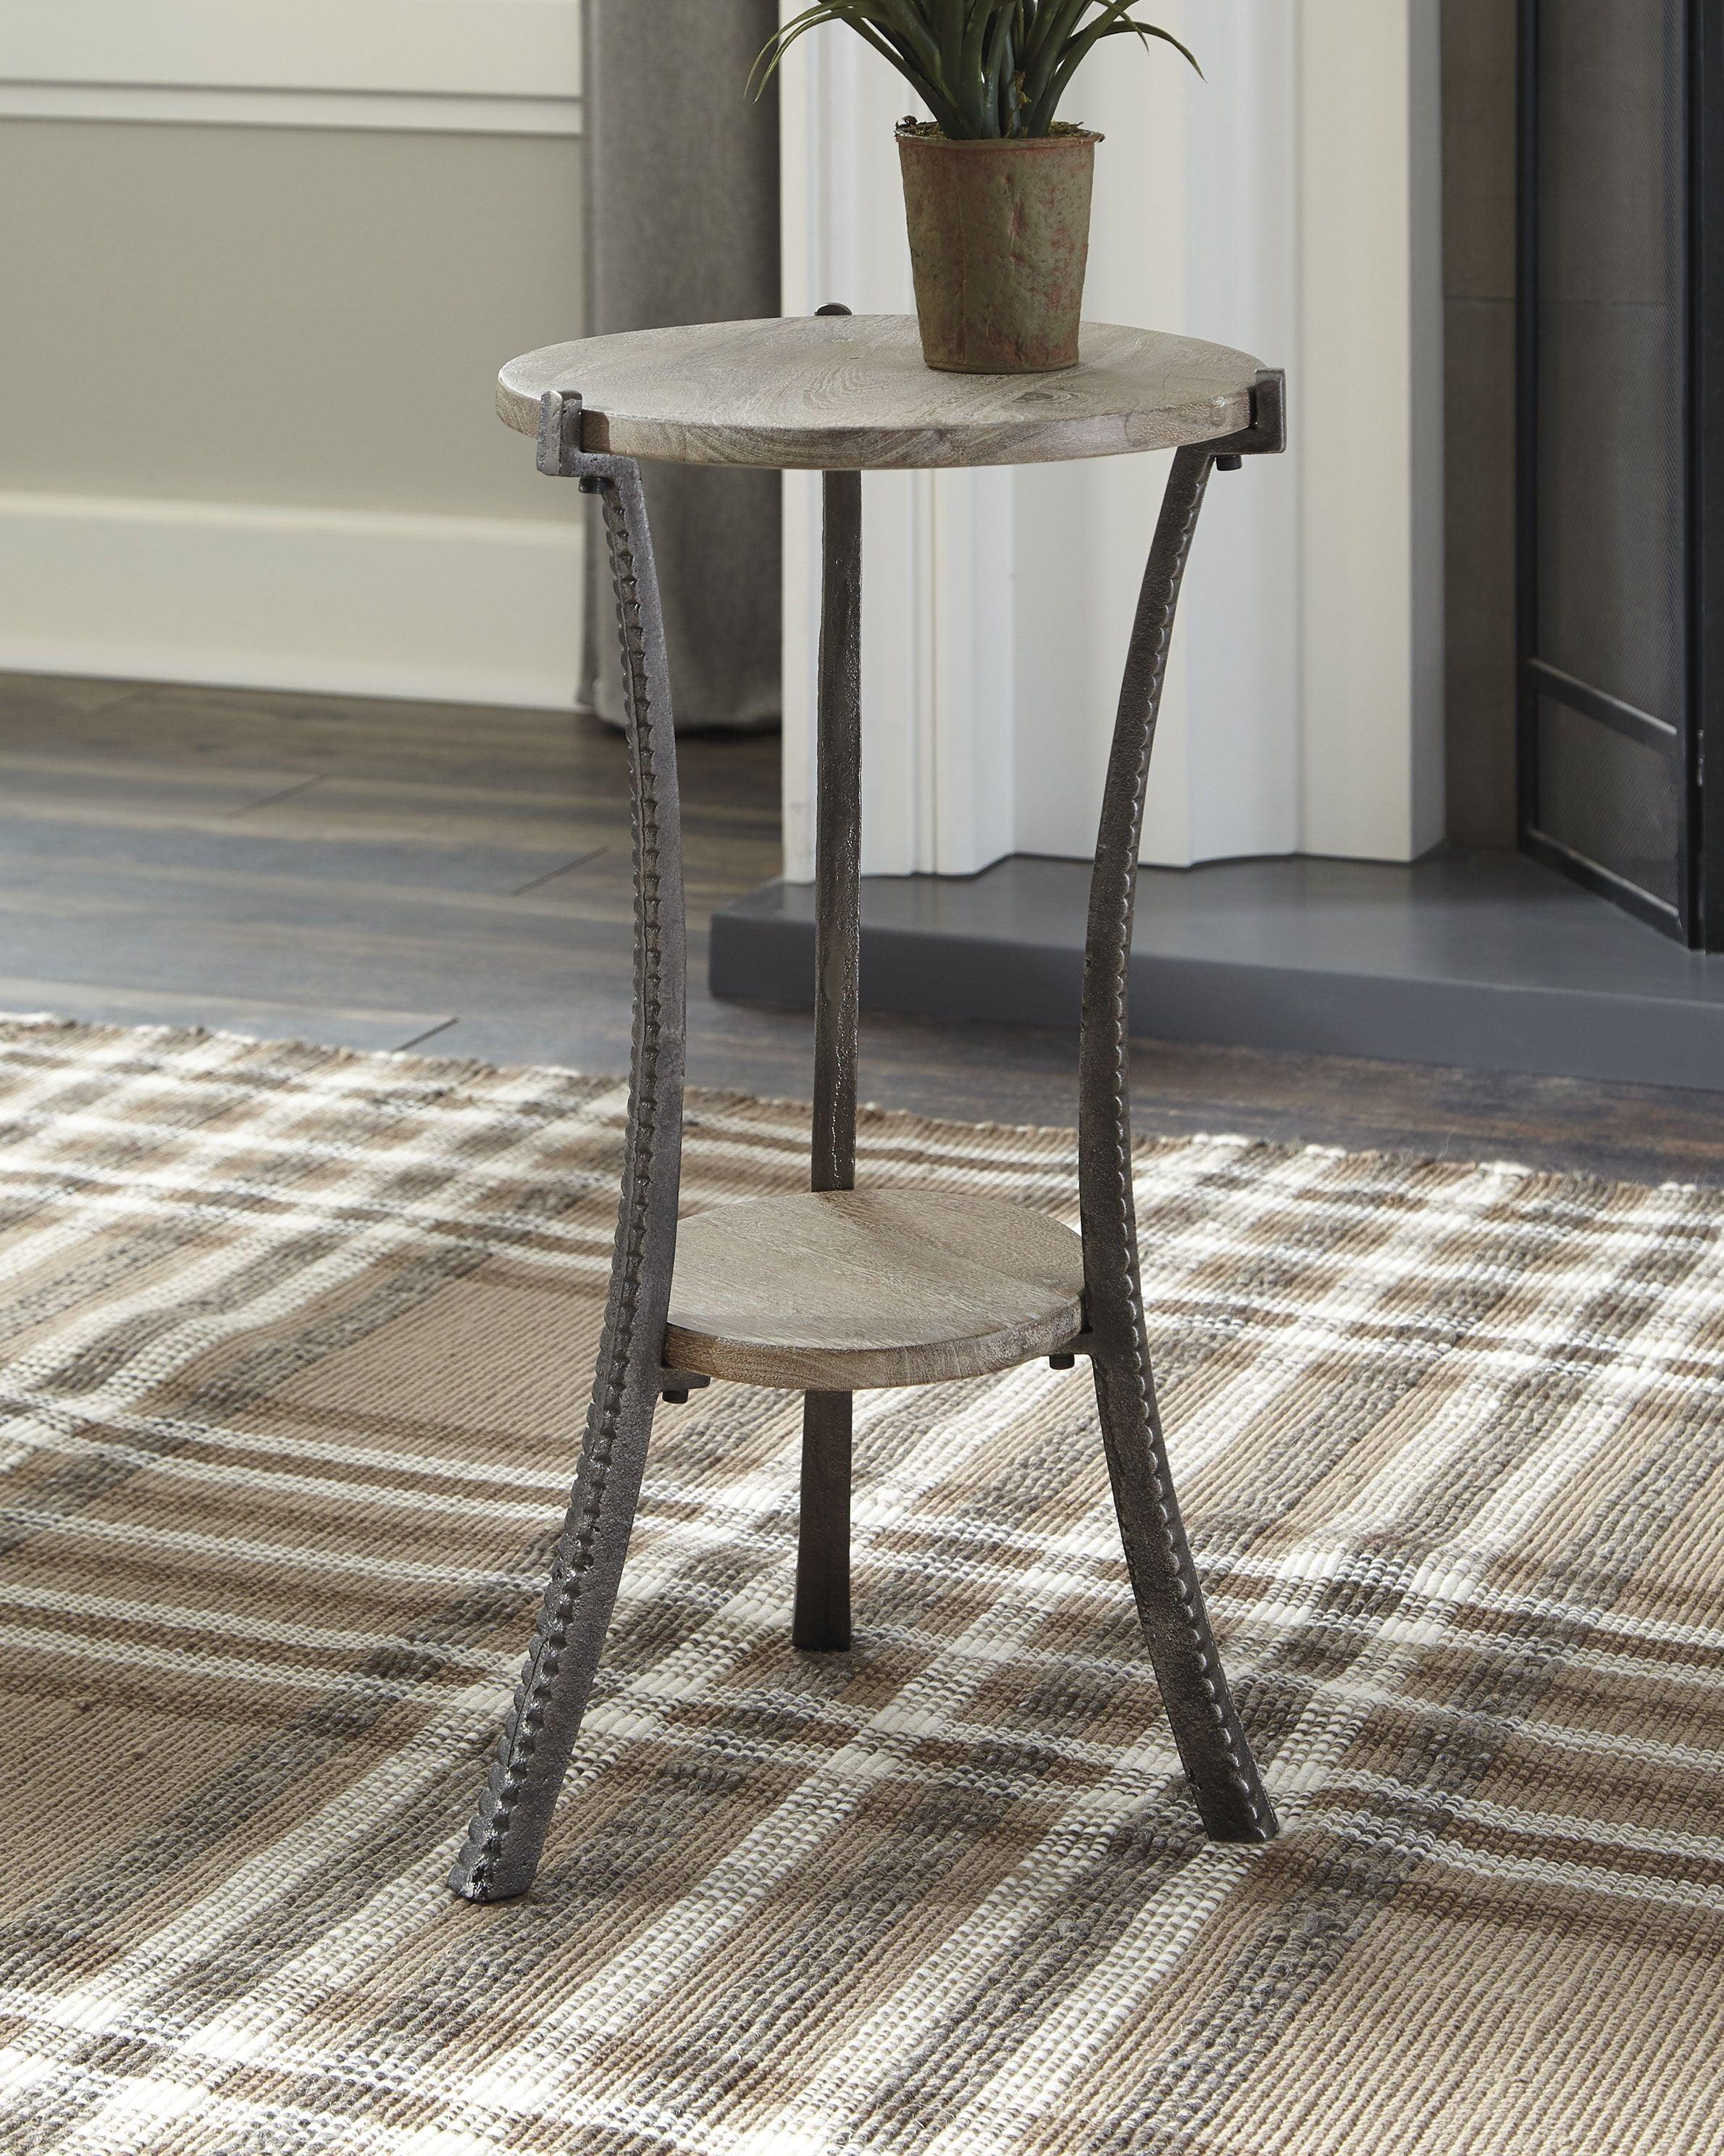 Ashley Furniture - Enderton - White Wash / Pewter - Accent Table - 5th Avenue Furniture